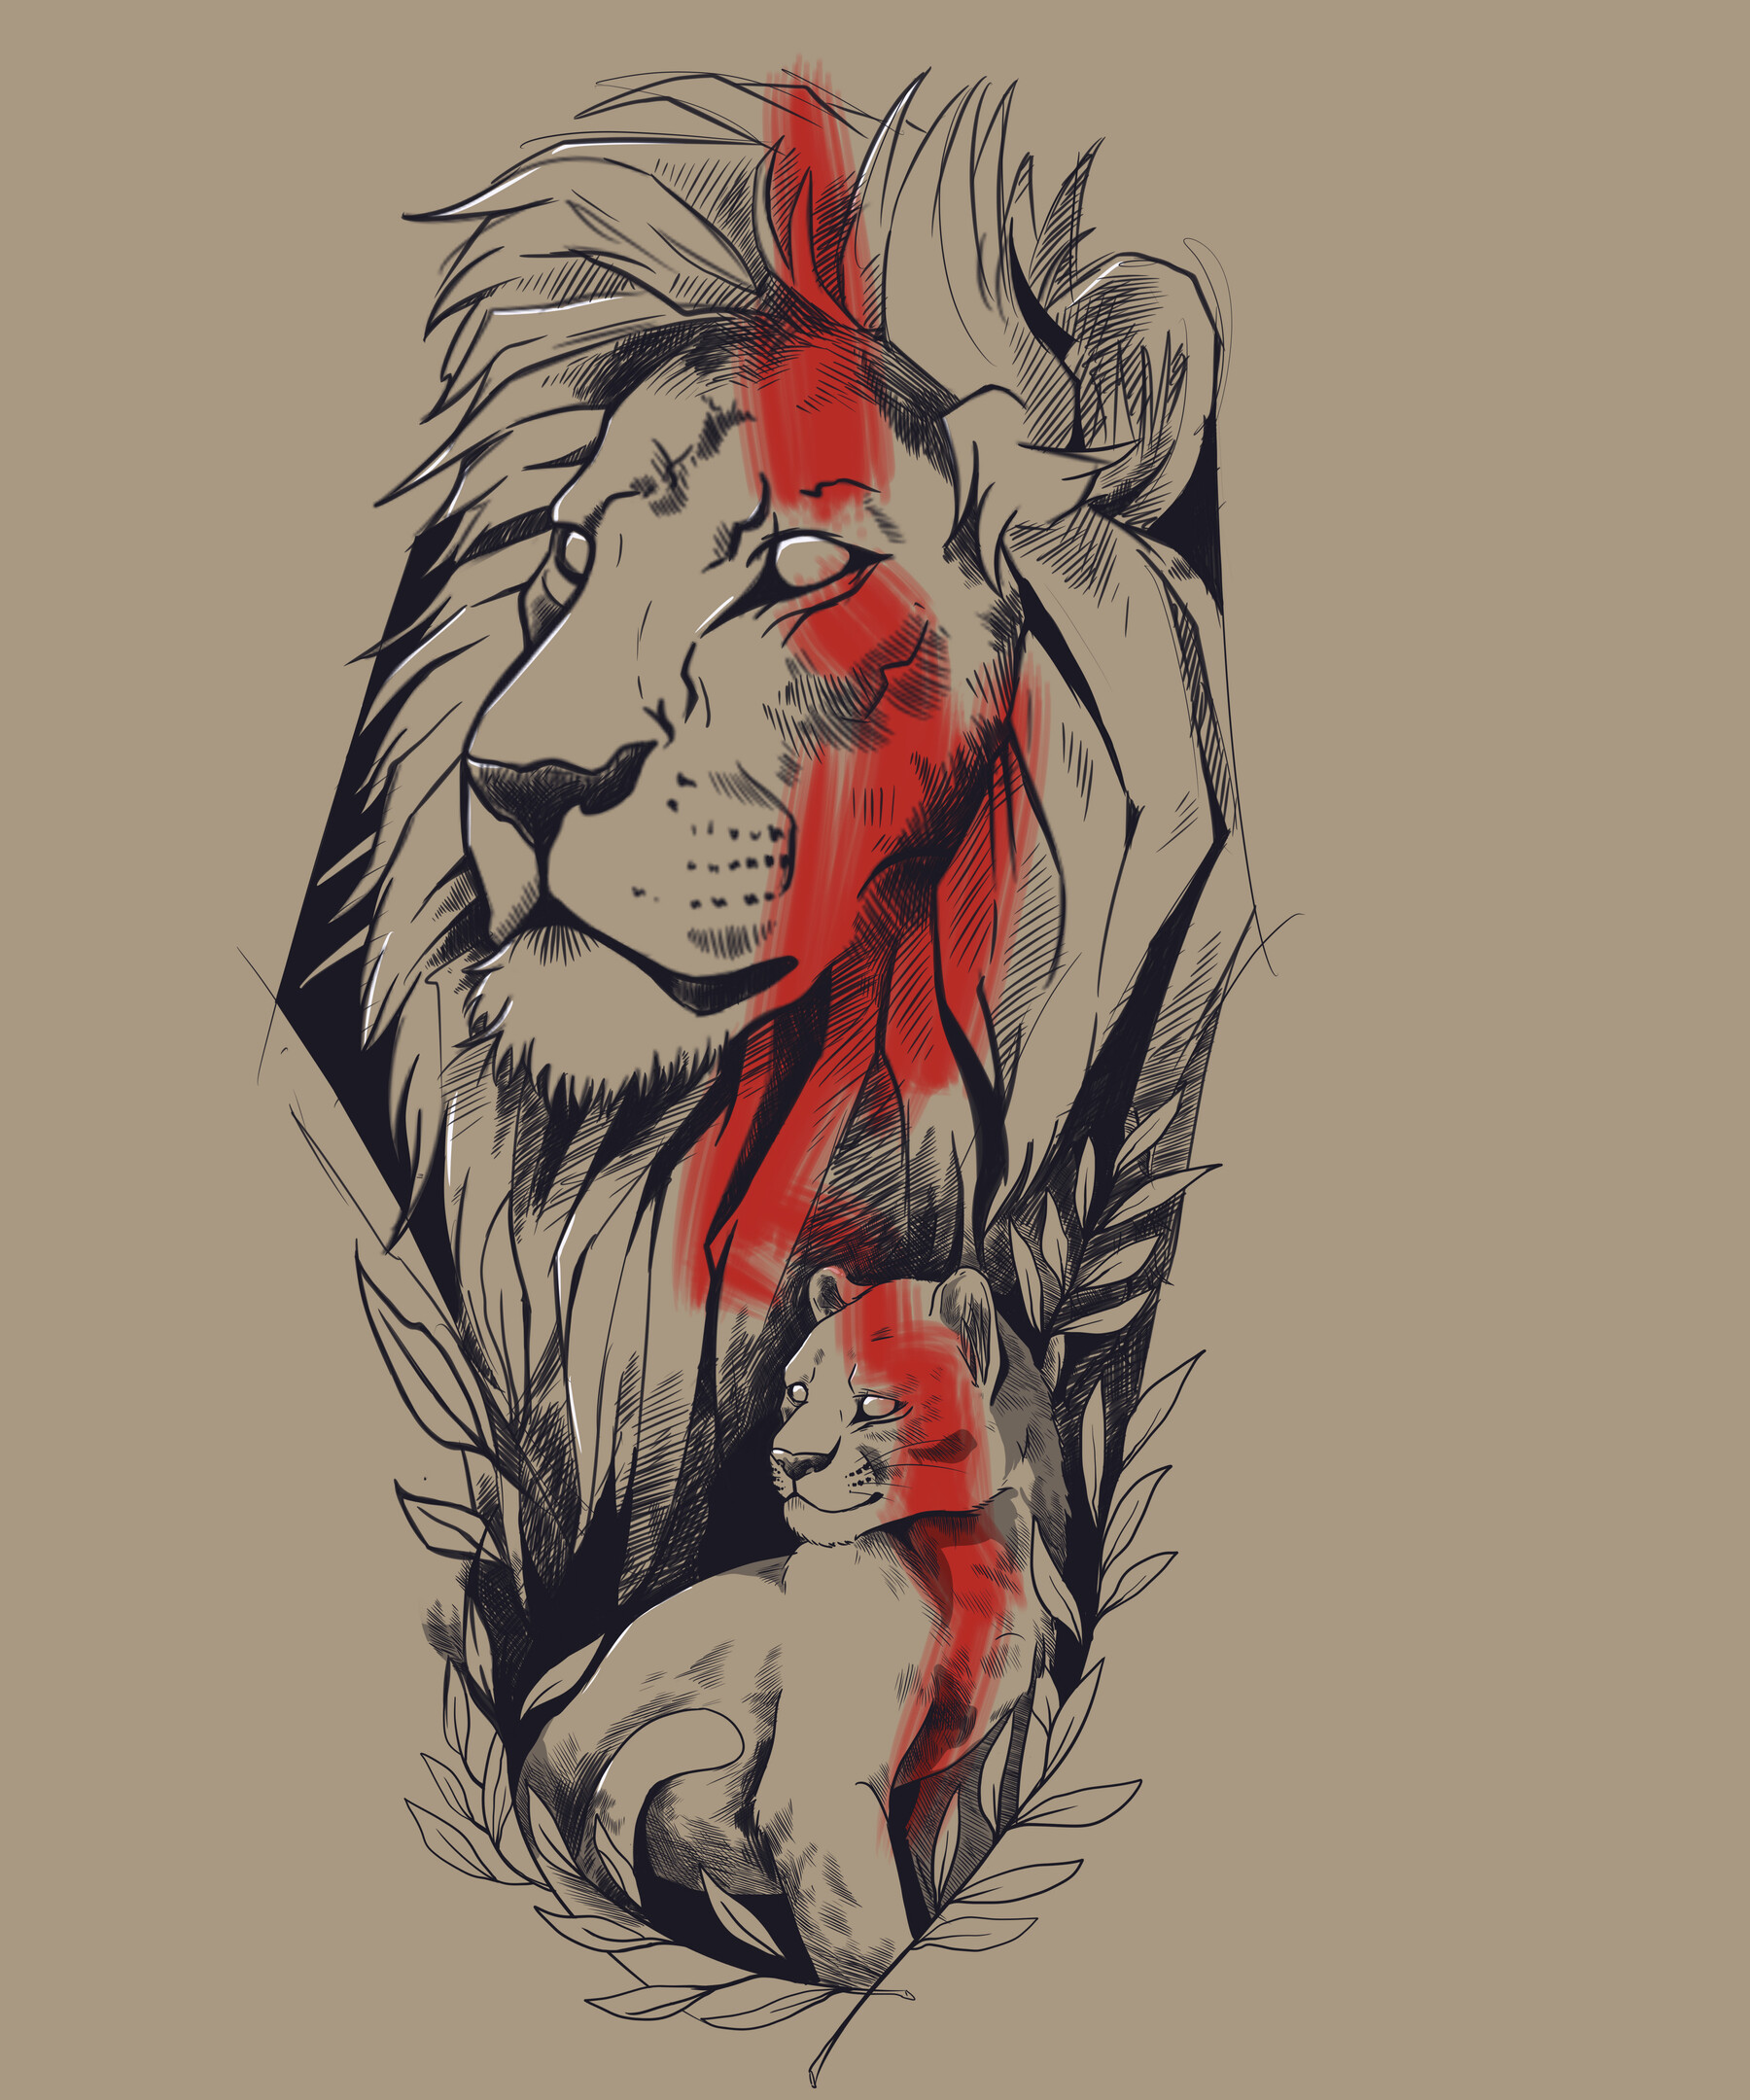 8,556 Angry Lion Tattoo Images, Stock Photos, 3D objects, & Vectors |  Shutterstock